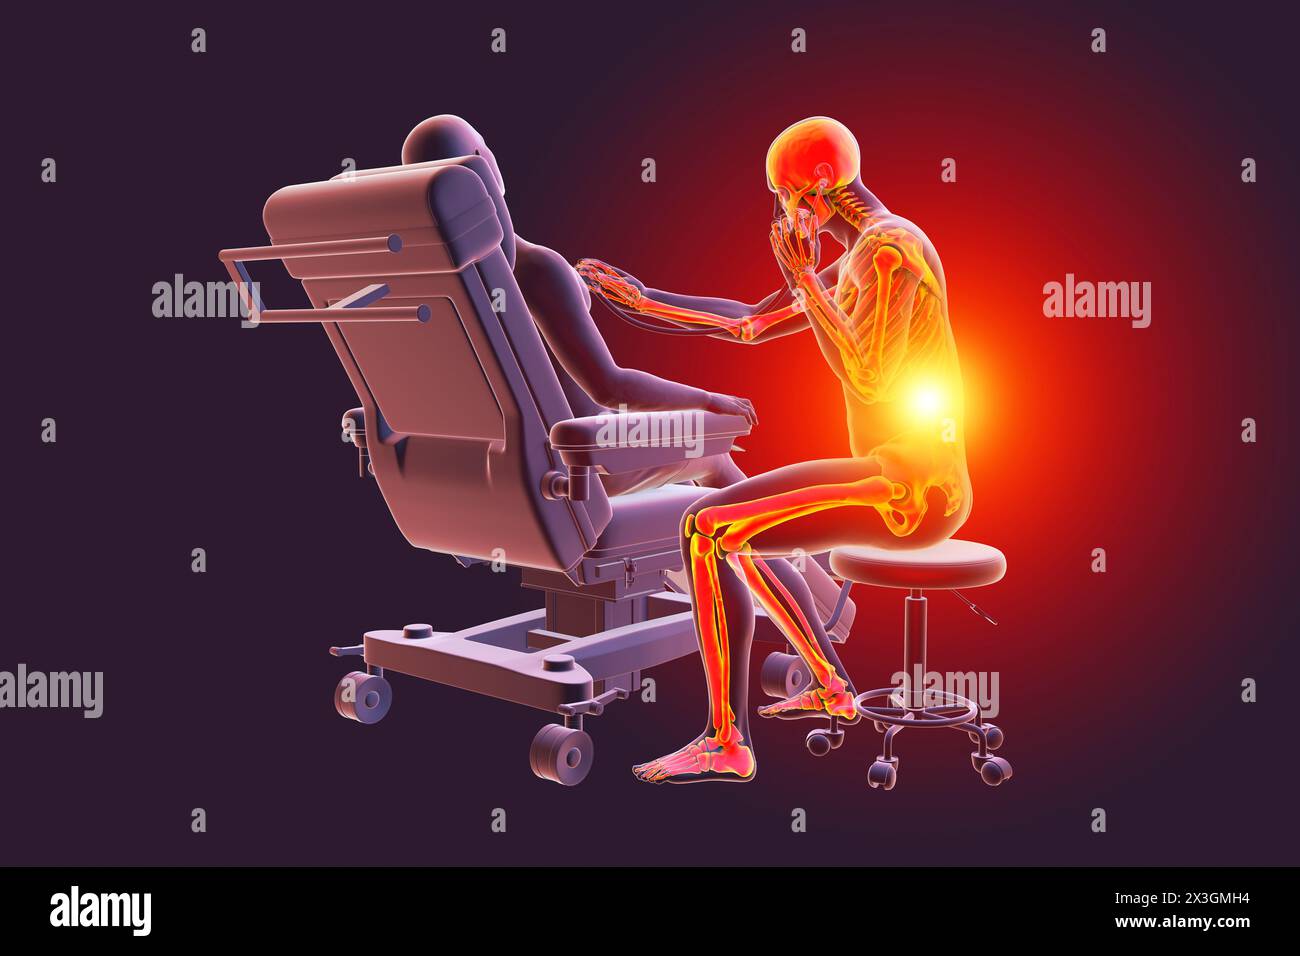 Illustration symbolising occupational hazards in healthcare, featuring a healthcare worker experiencing back pain. Stock Photo